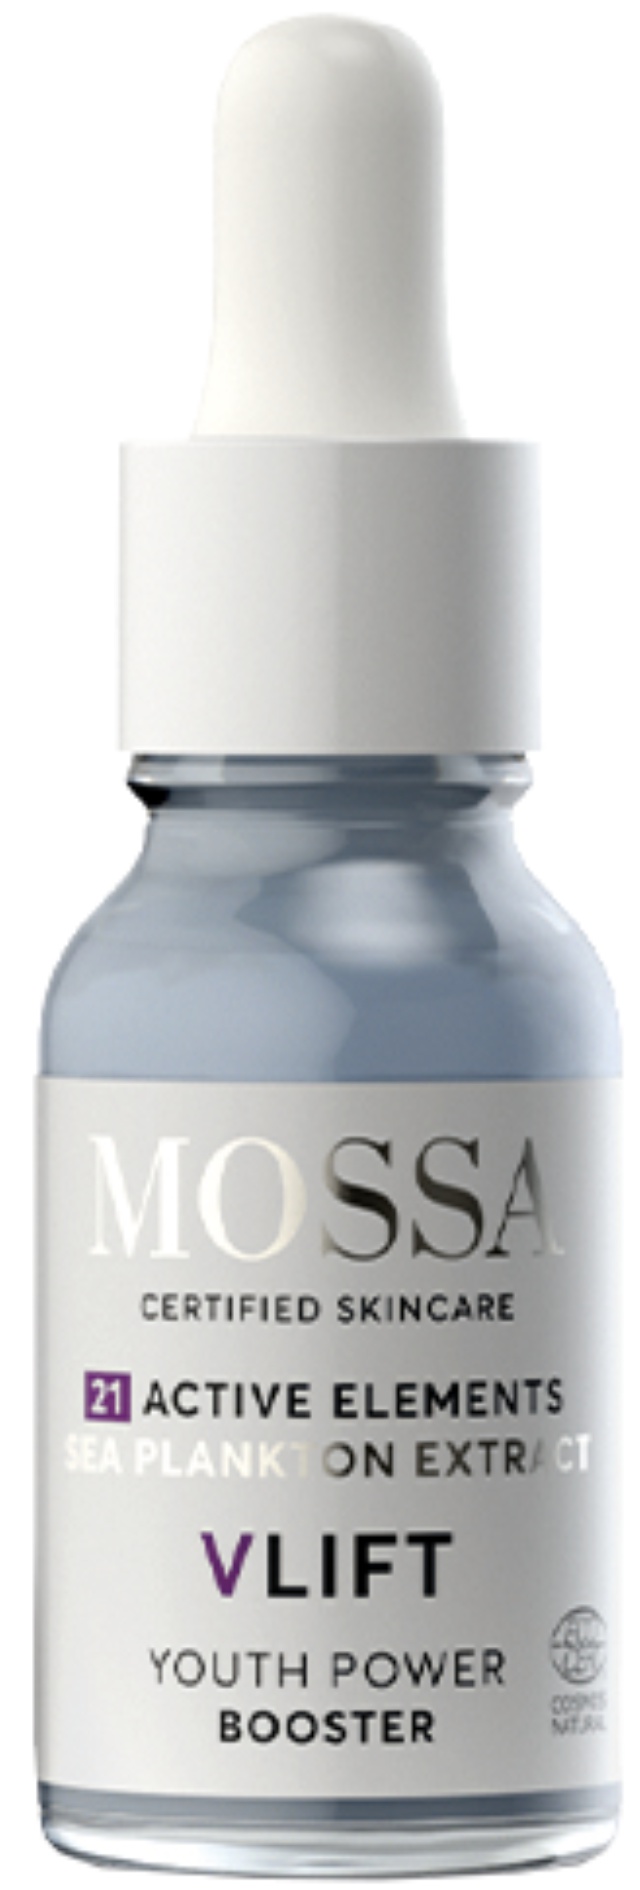 Mossa V Lift Youth Power Booster